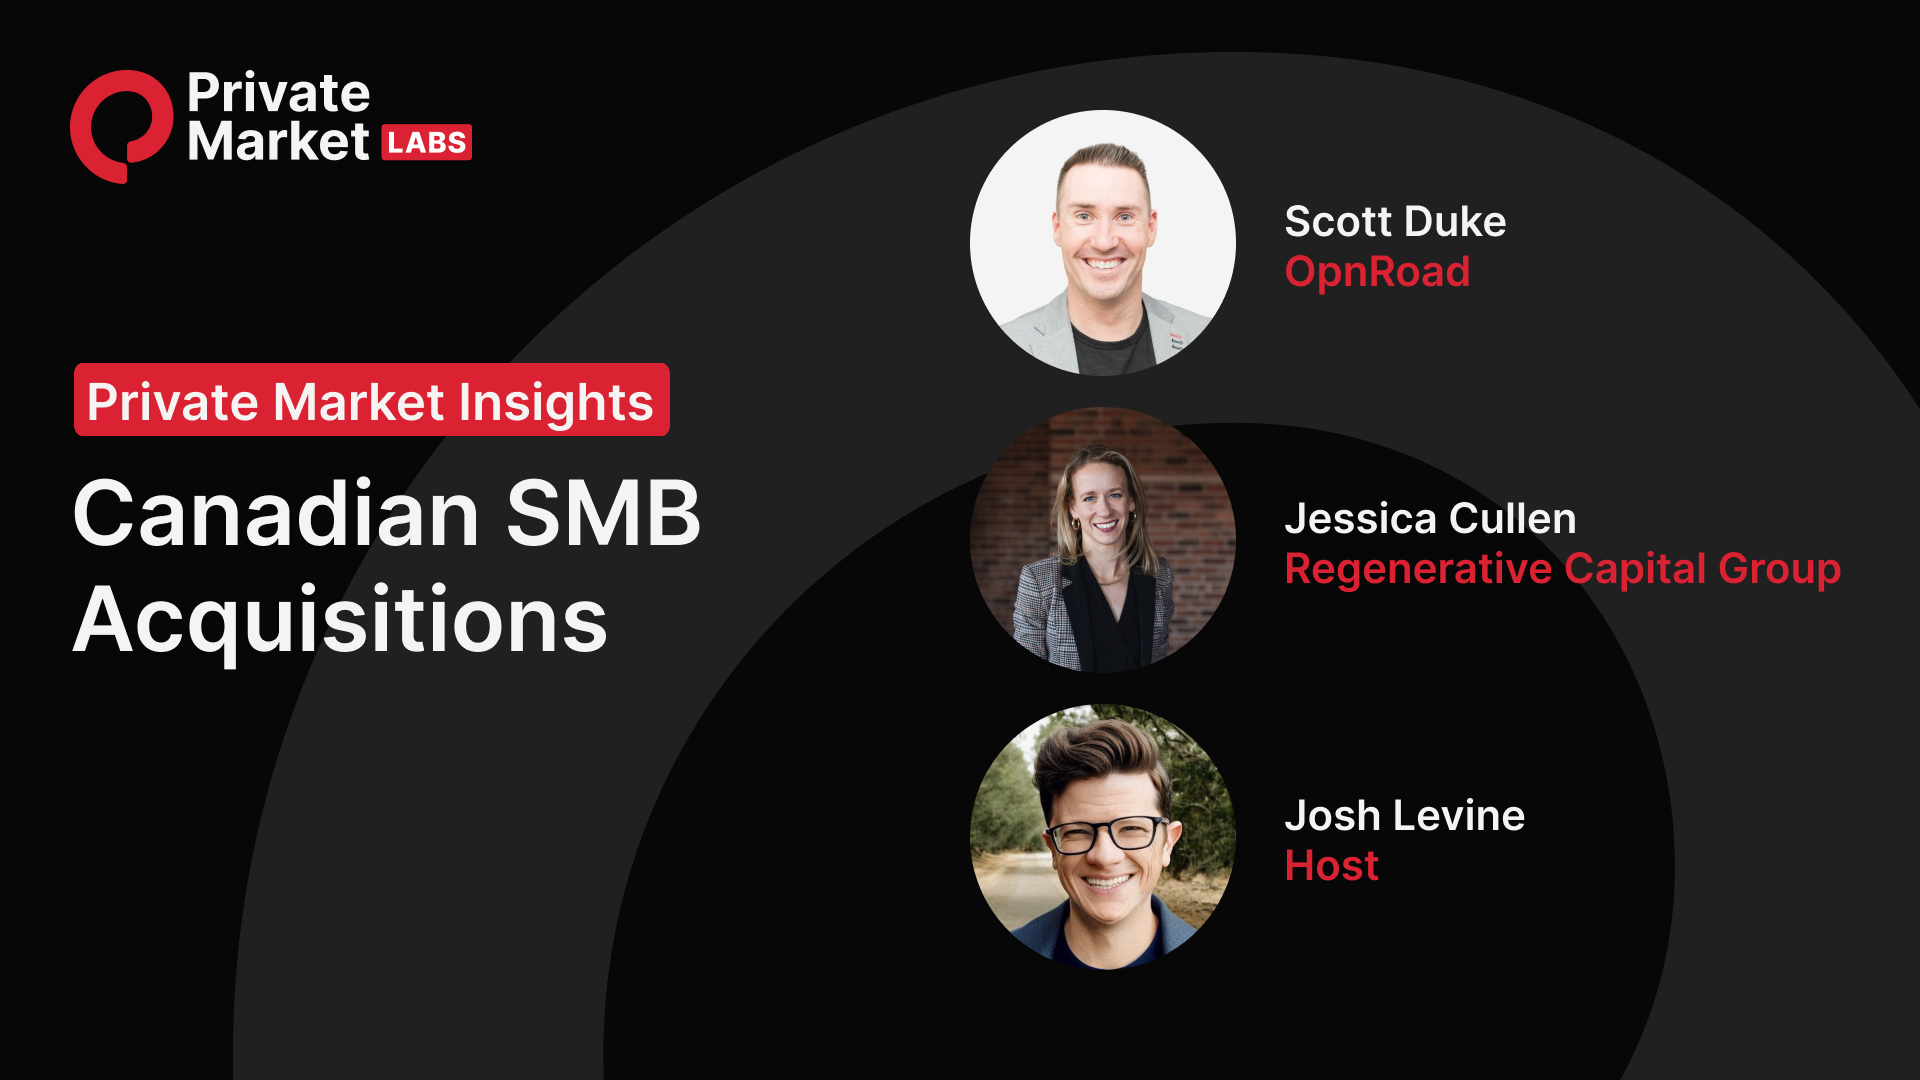 International SMB Acquisitions: Canada, with Jessica Cullen and Scott Duke